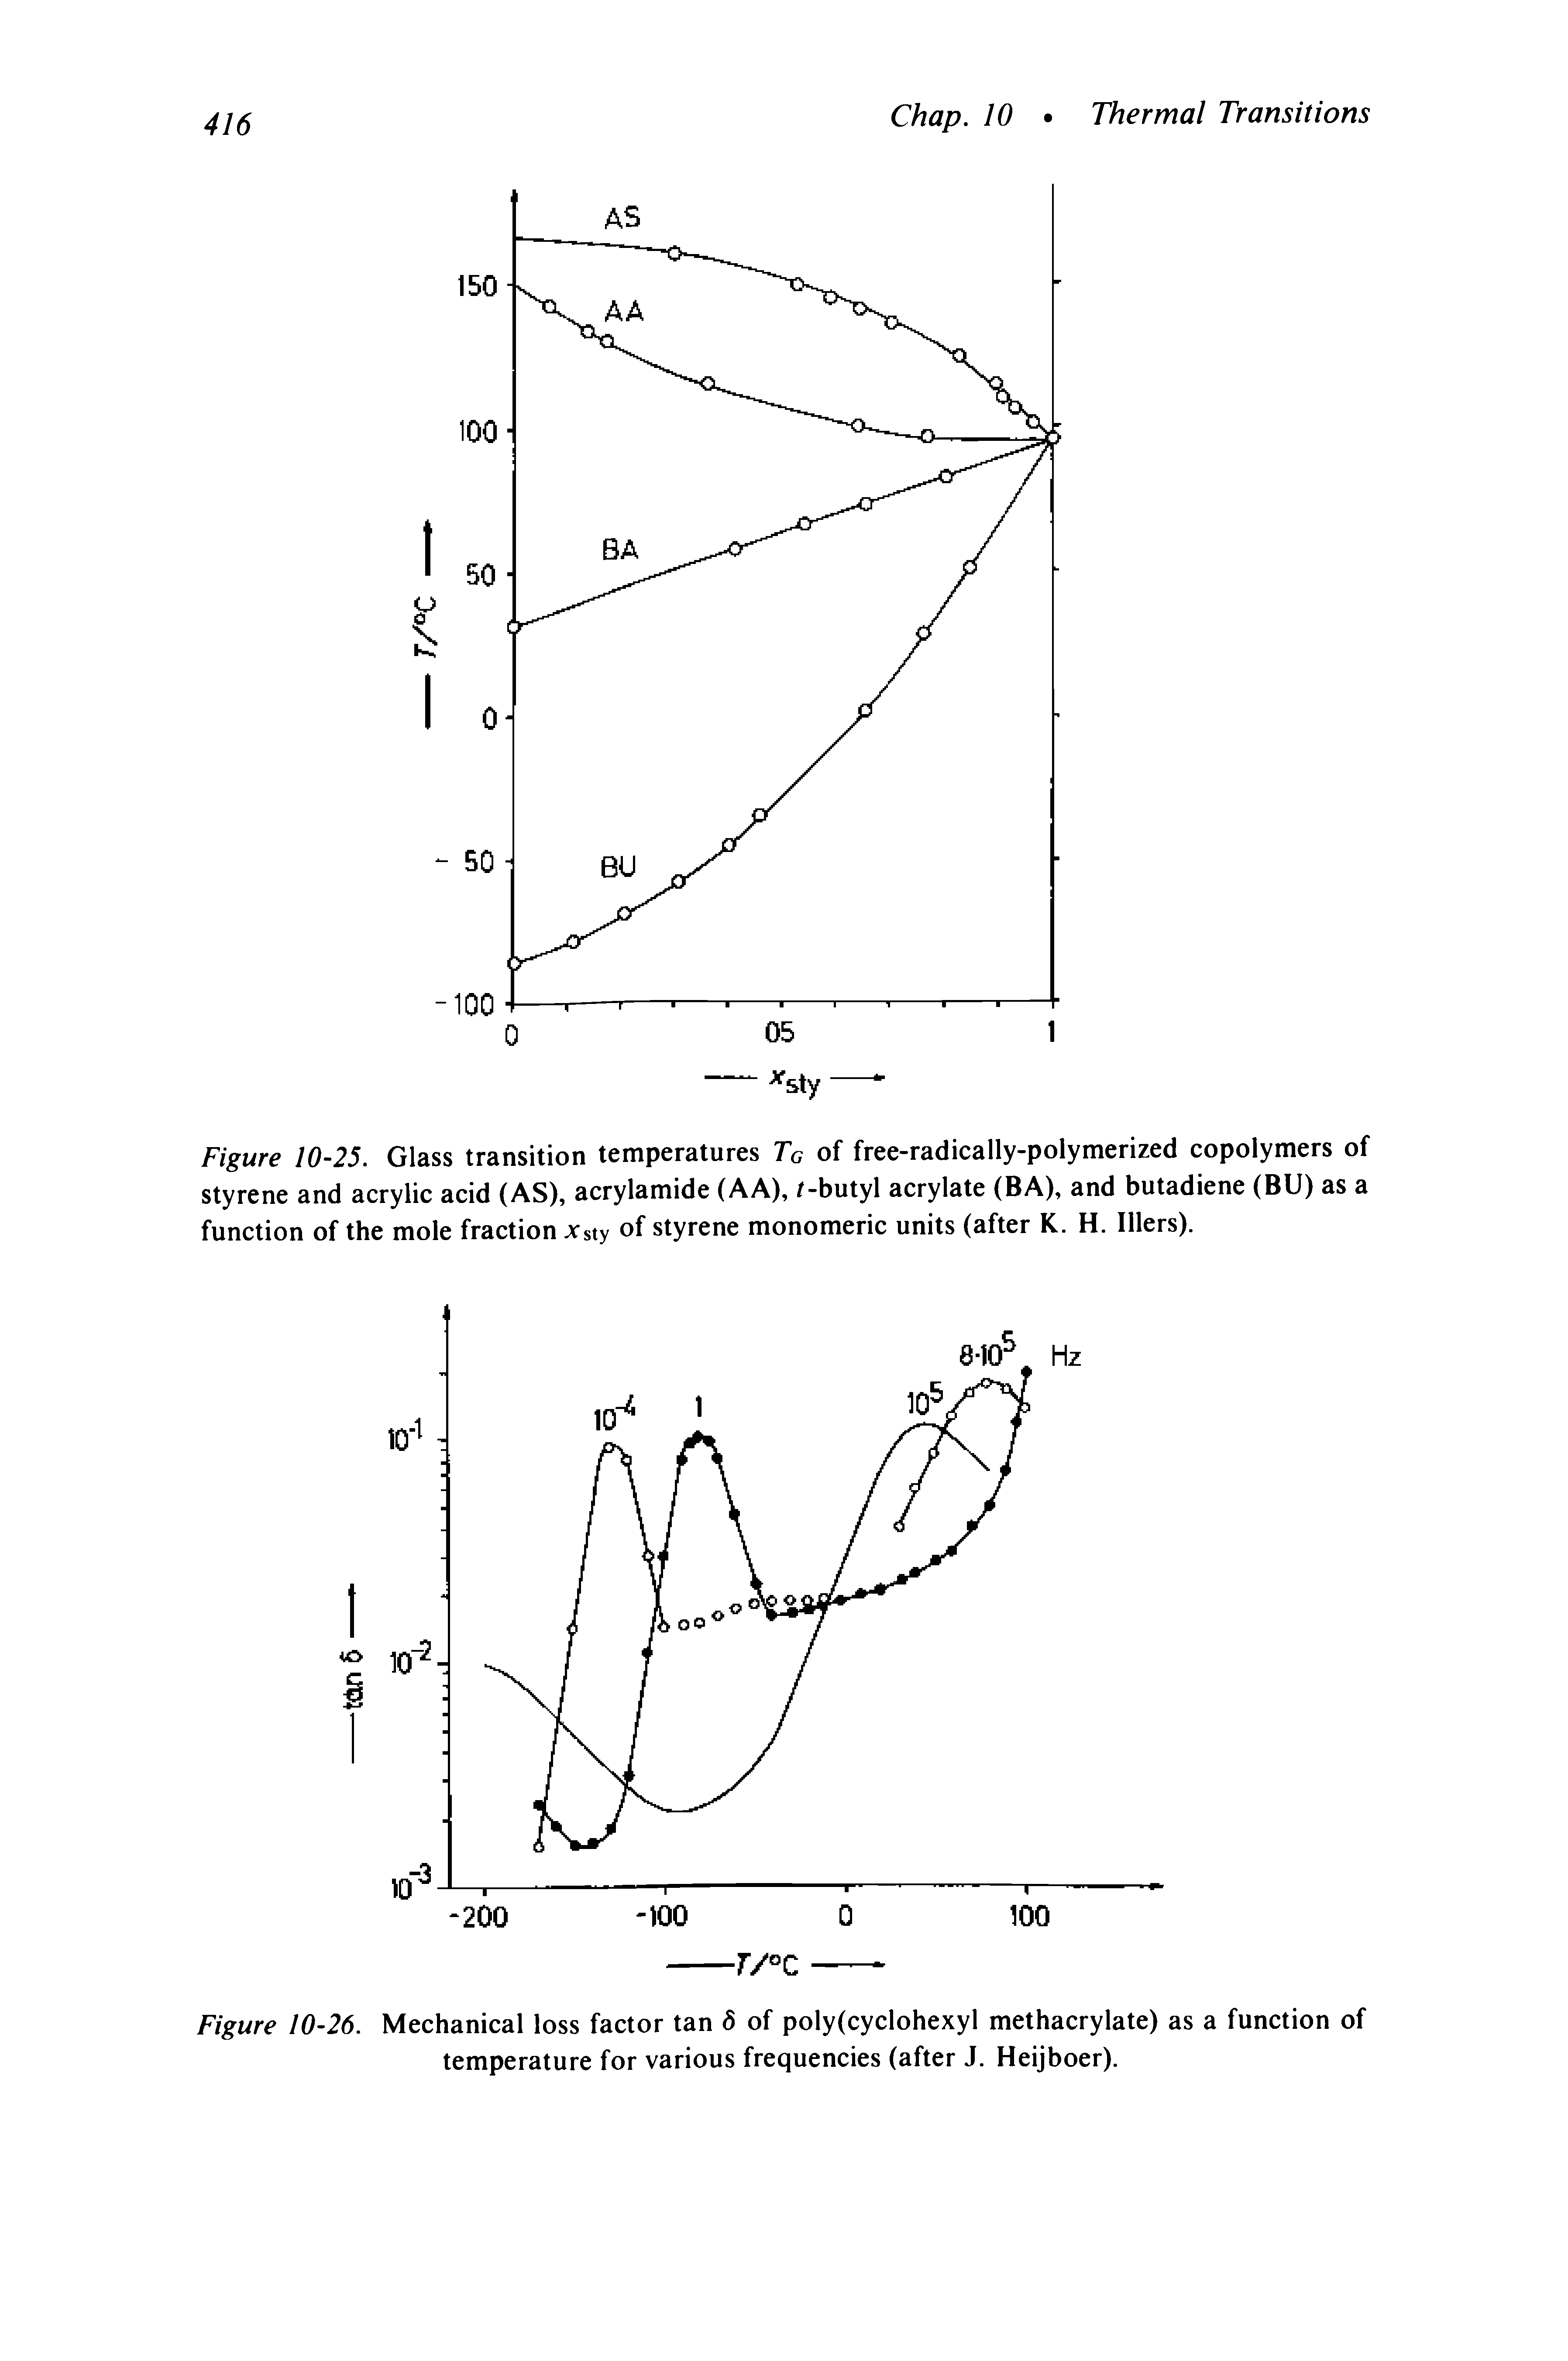 Figure 10-25. Glass transition temperatures Tg of free-radically-polymerized copolymers of styrene and acrylic acid (AS), acrylamide (AA), /-butyl acrylate (BA), and butadiene (BU) as a function of the mole fraction Xsty of styrene monomeric units (after K. H. lllers).